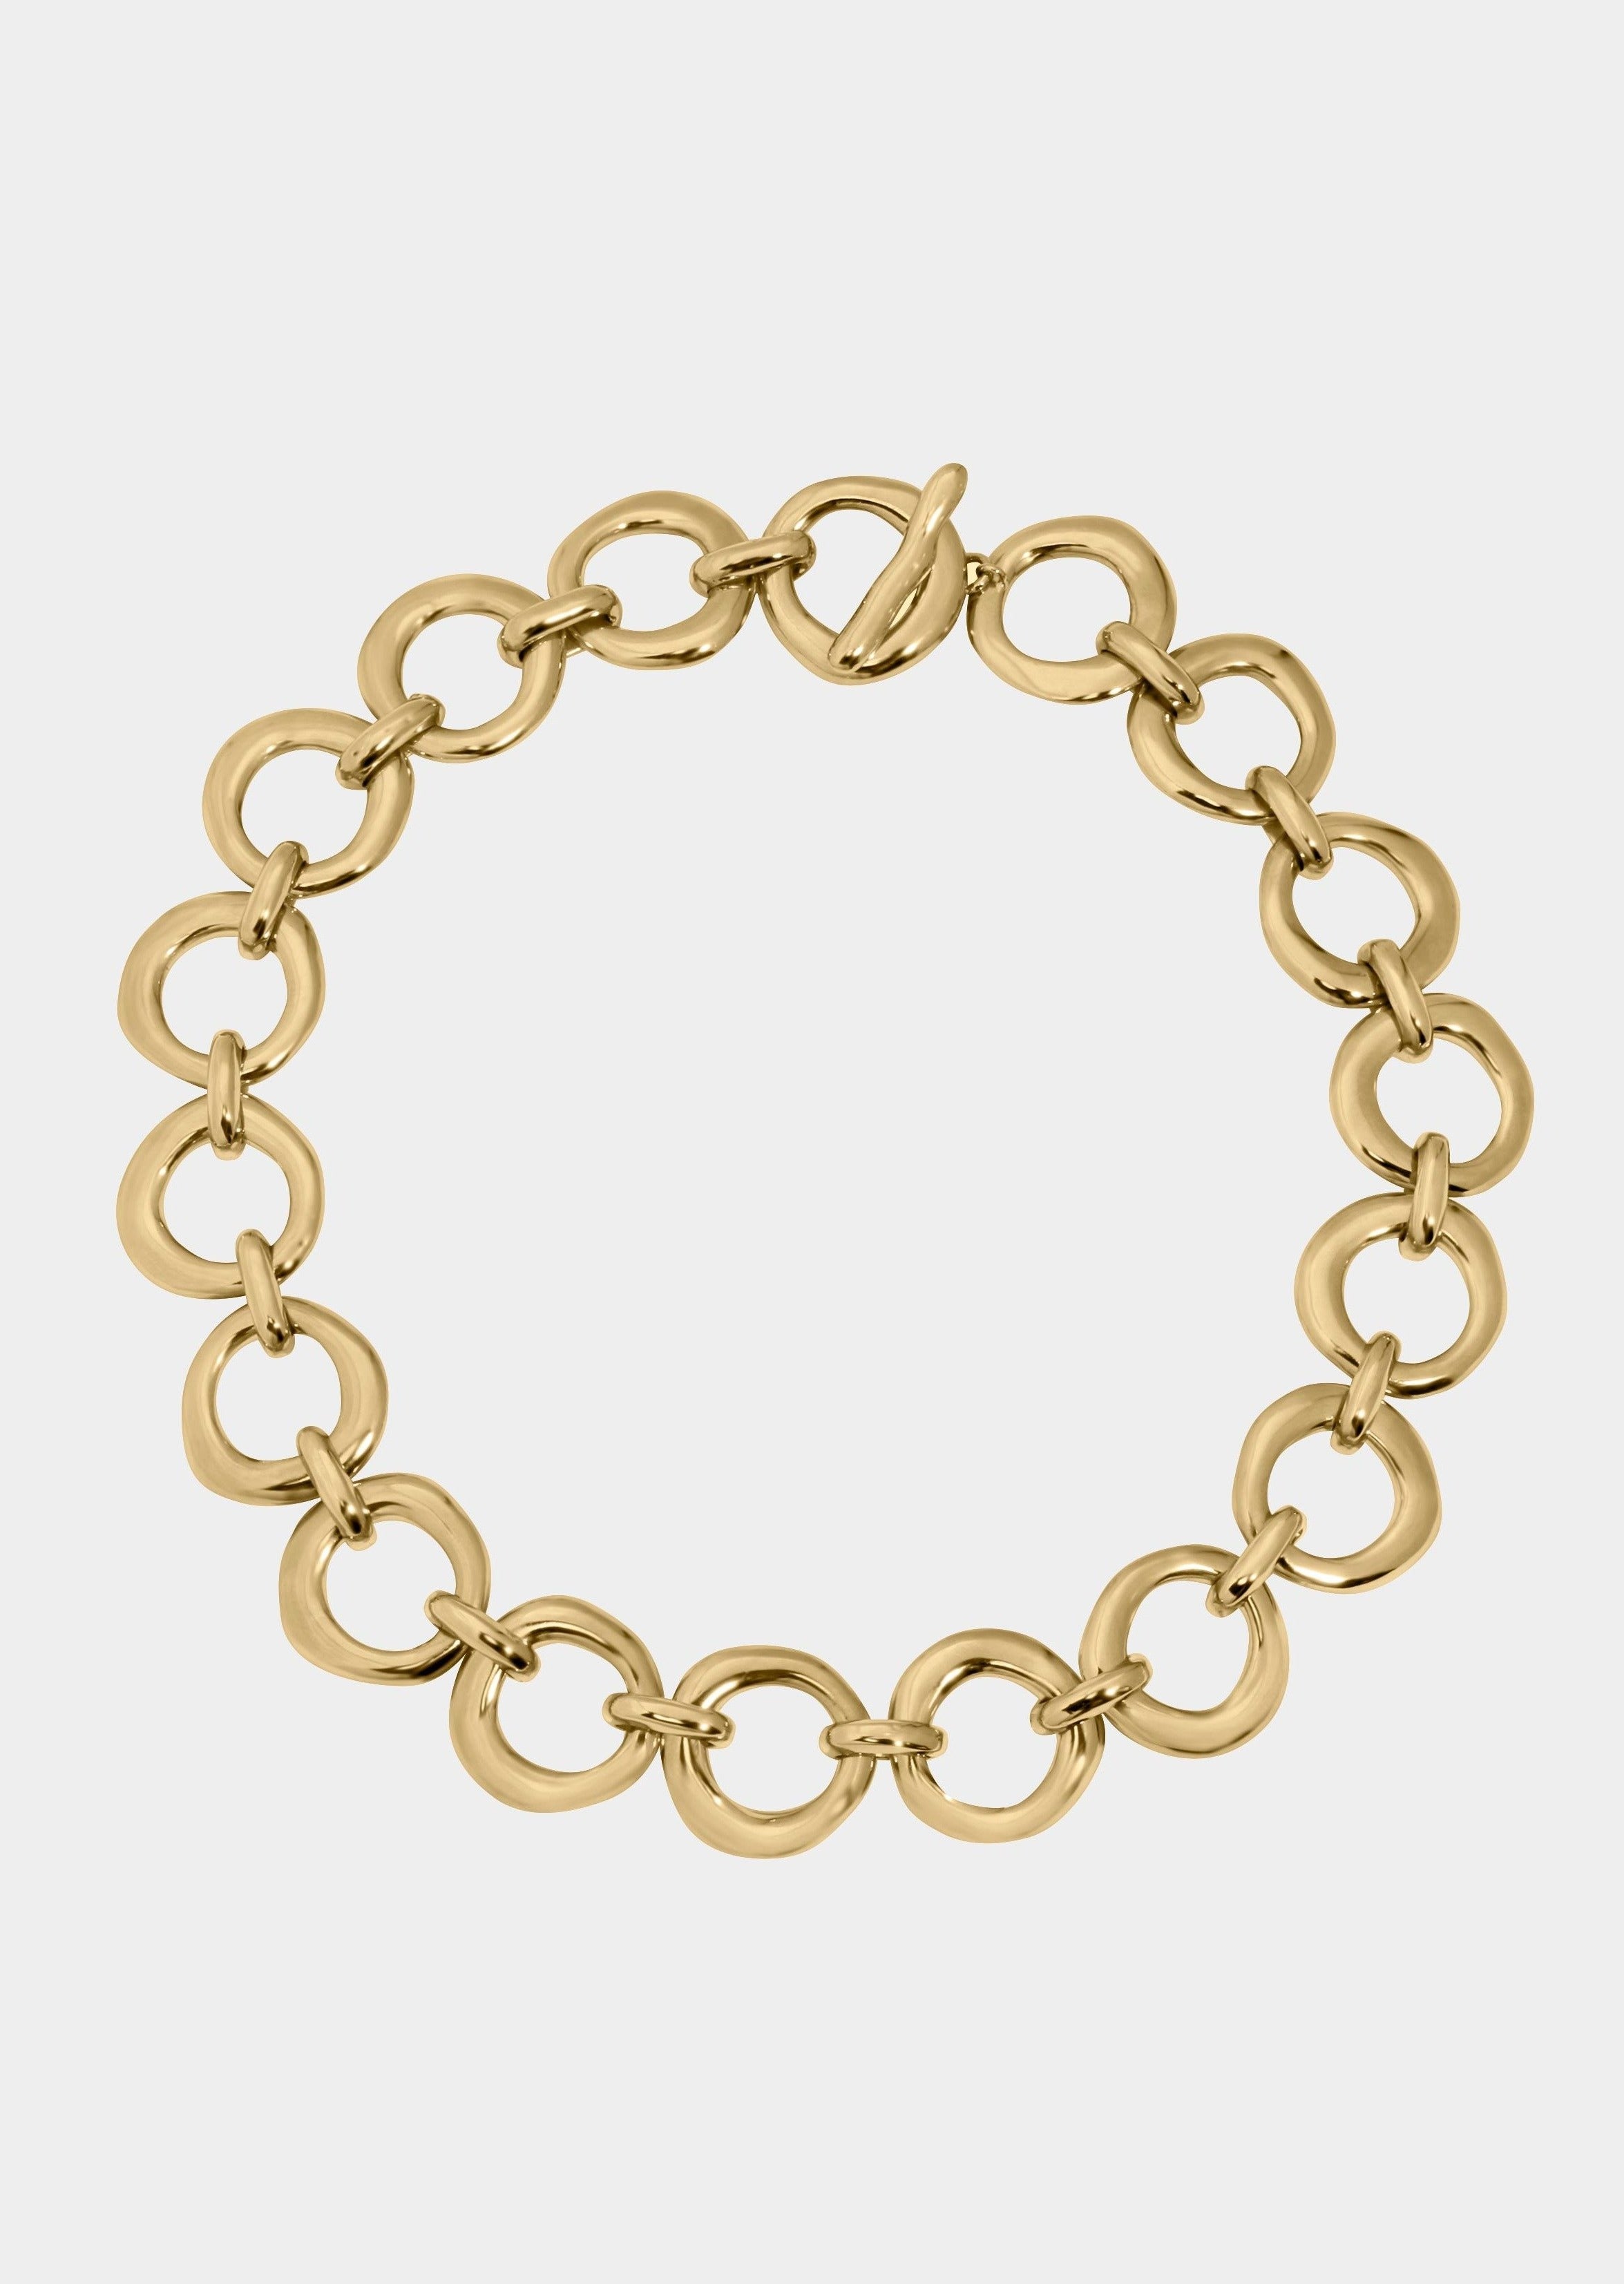 Imperfect Circles Linked Chain Necklace | Bronze 14K